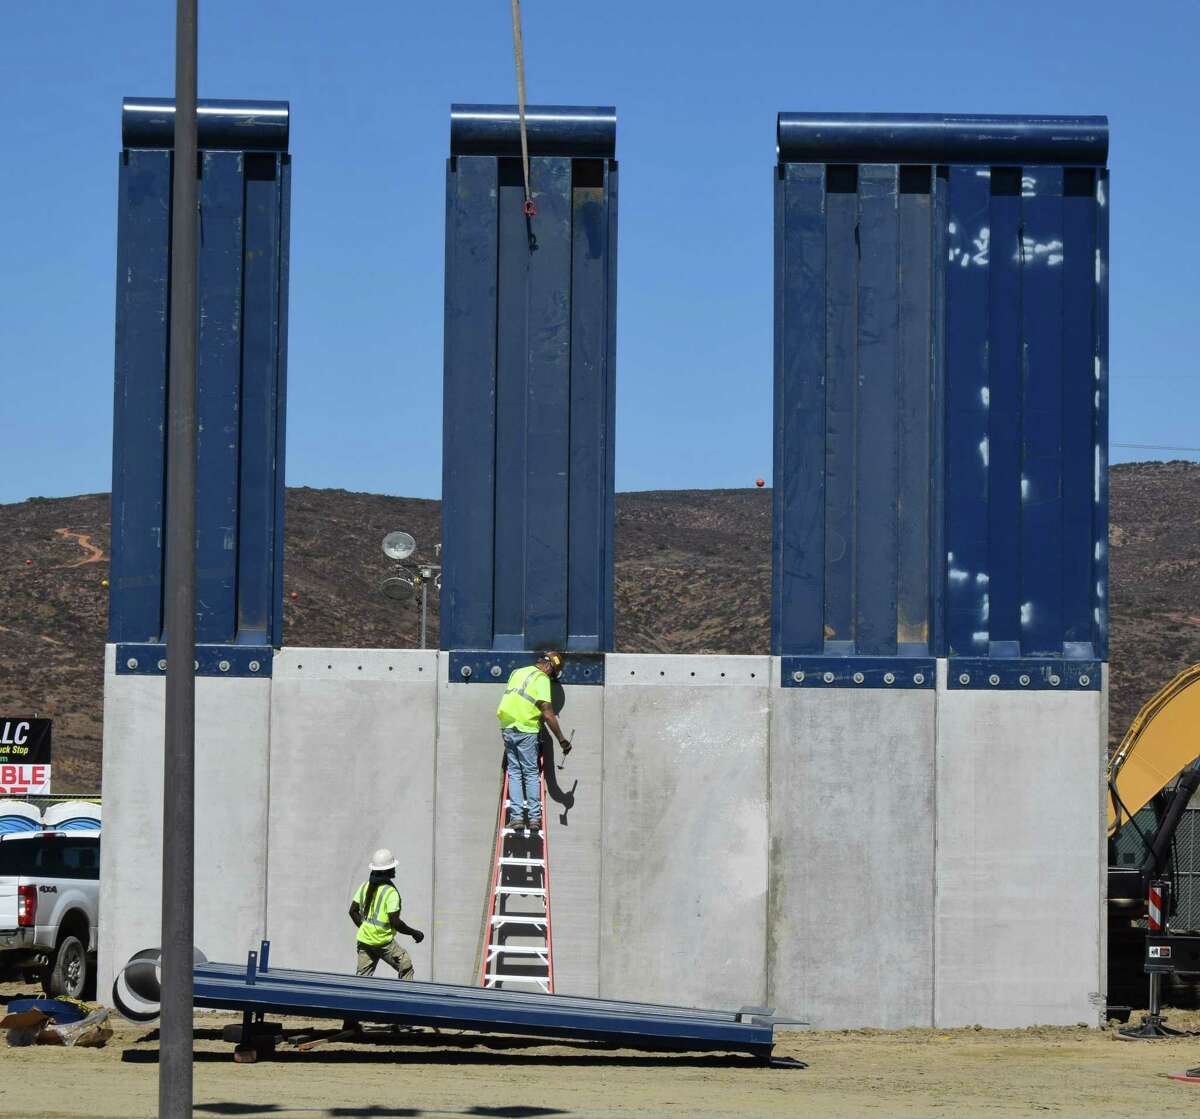 A border wall prototype being constructed near Otay Mesa, California in October which can be seen by crossing into Tijuana, Mexico.